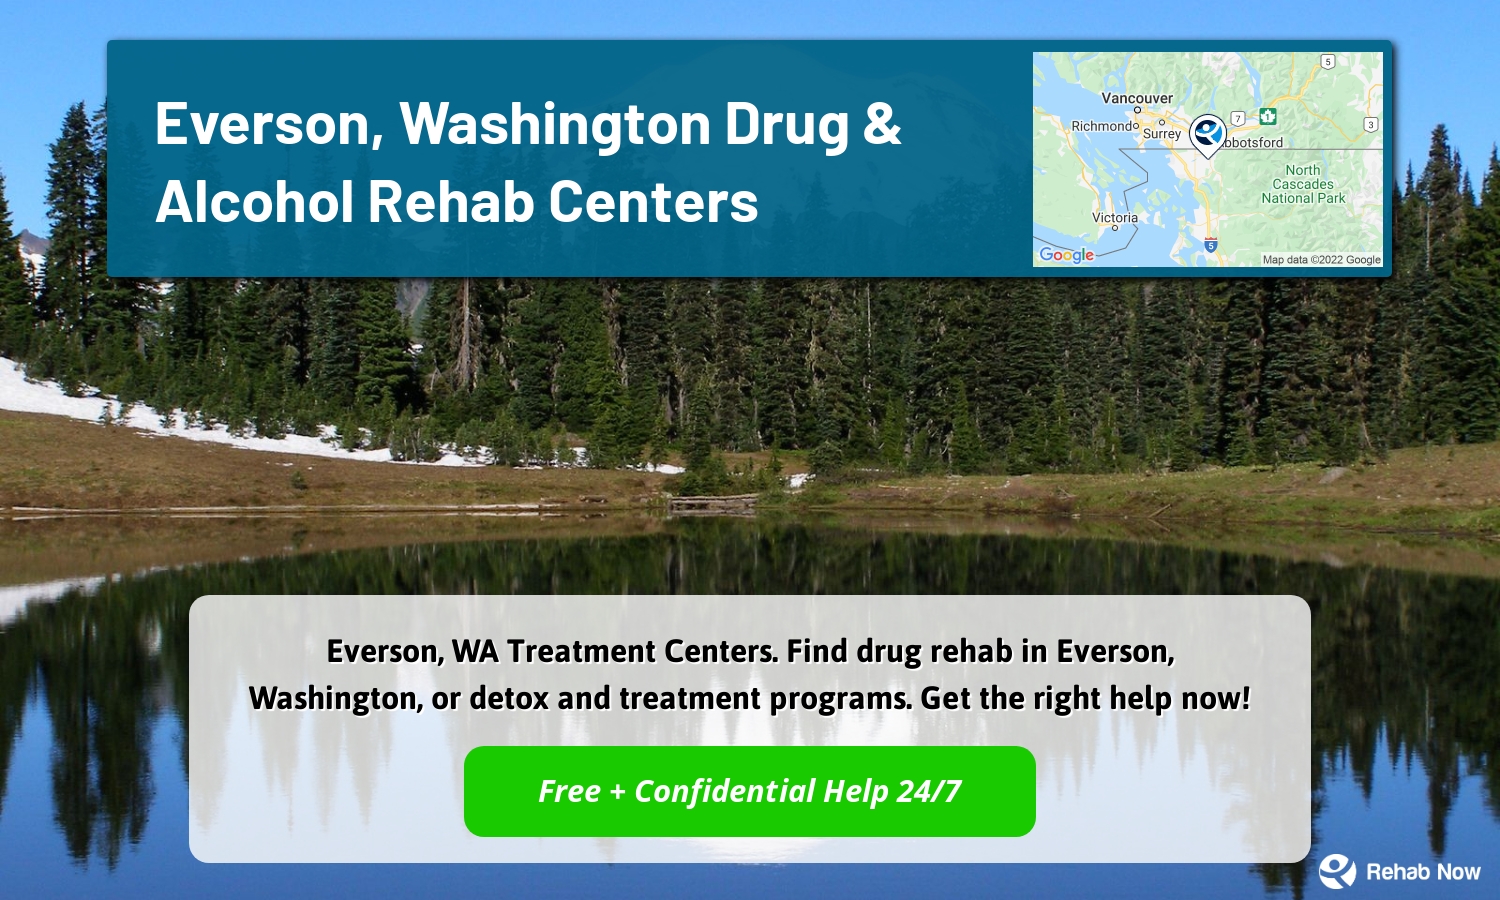 Everson, WA Treatment Centers. Find drug rehab in Everson, Washington, or detox and treatment programs. Get the right help now!